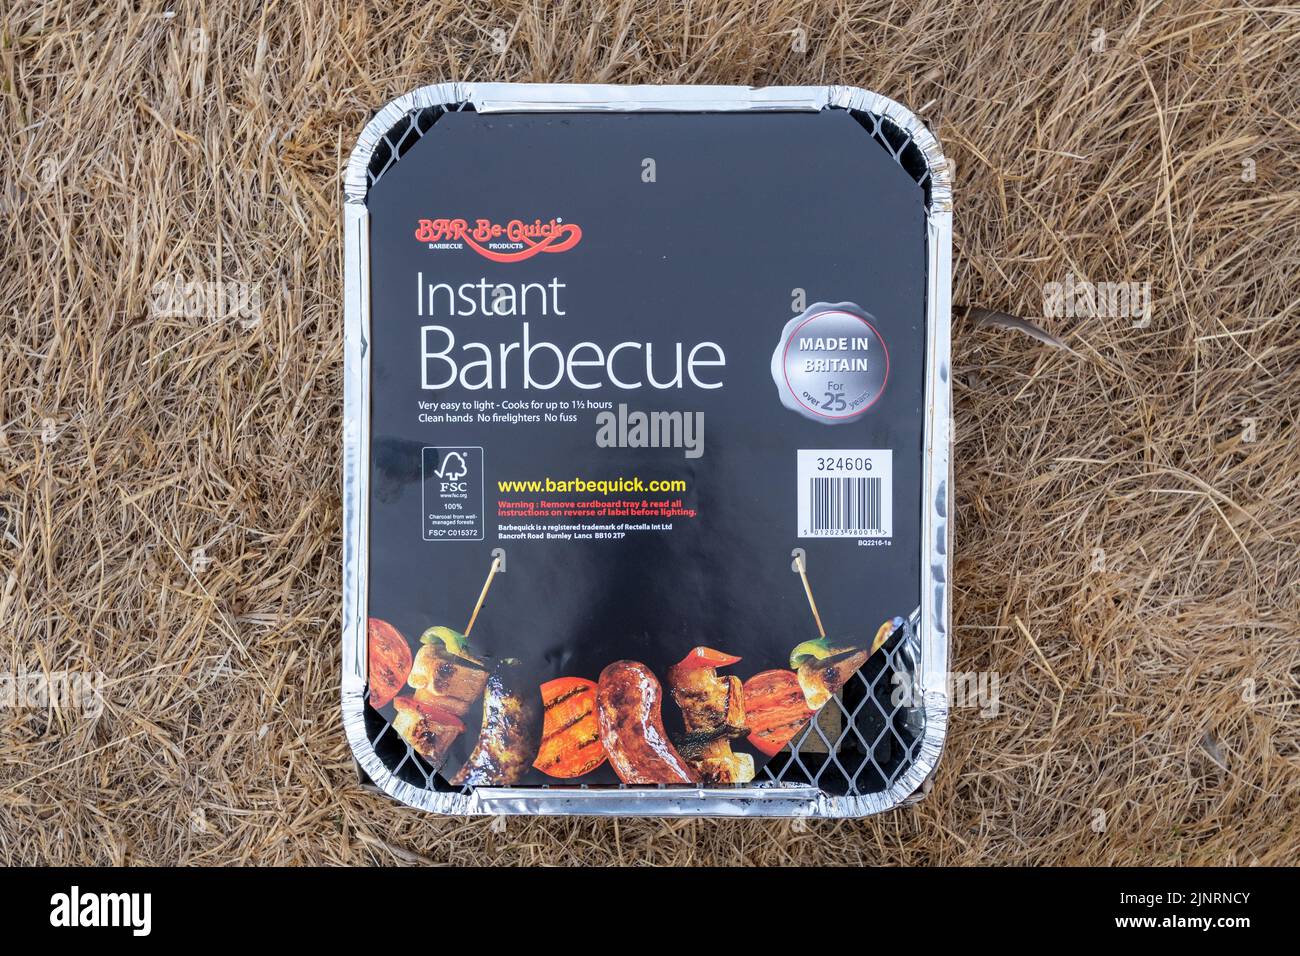 Disposable barbecue placed on parched brown grass, heatwave and drought in August 2022, UK. Concept - risk of fire, fires, wildfires Stock Photo